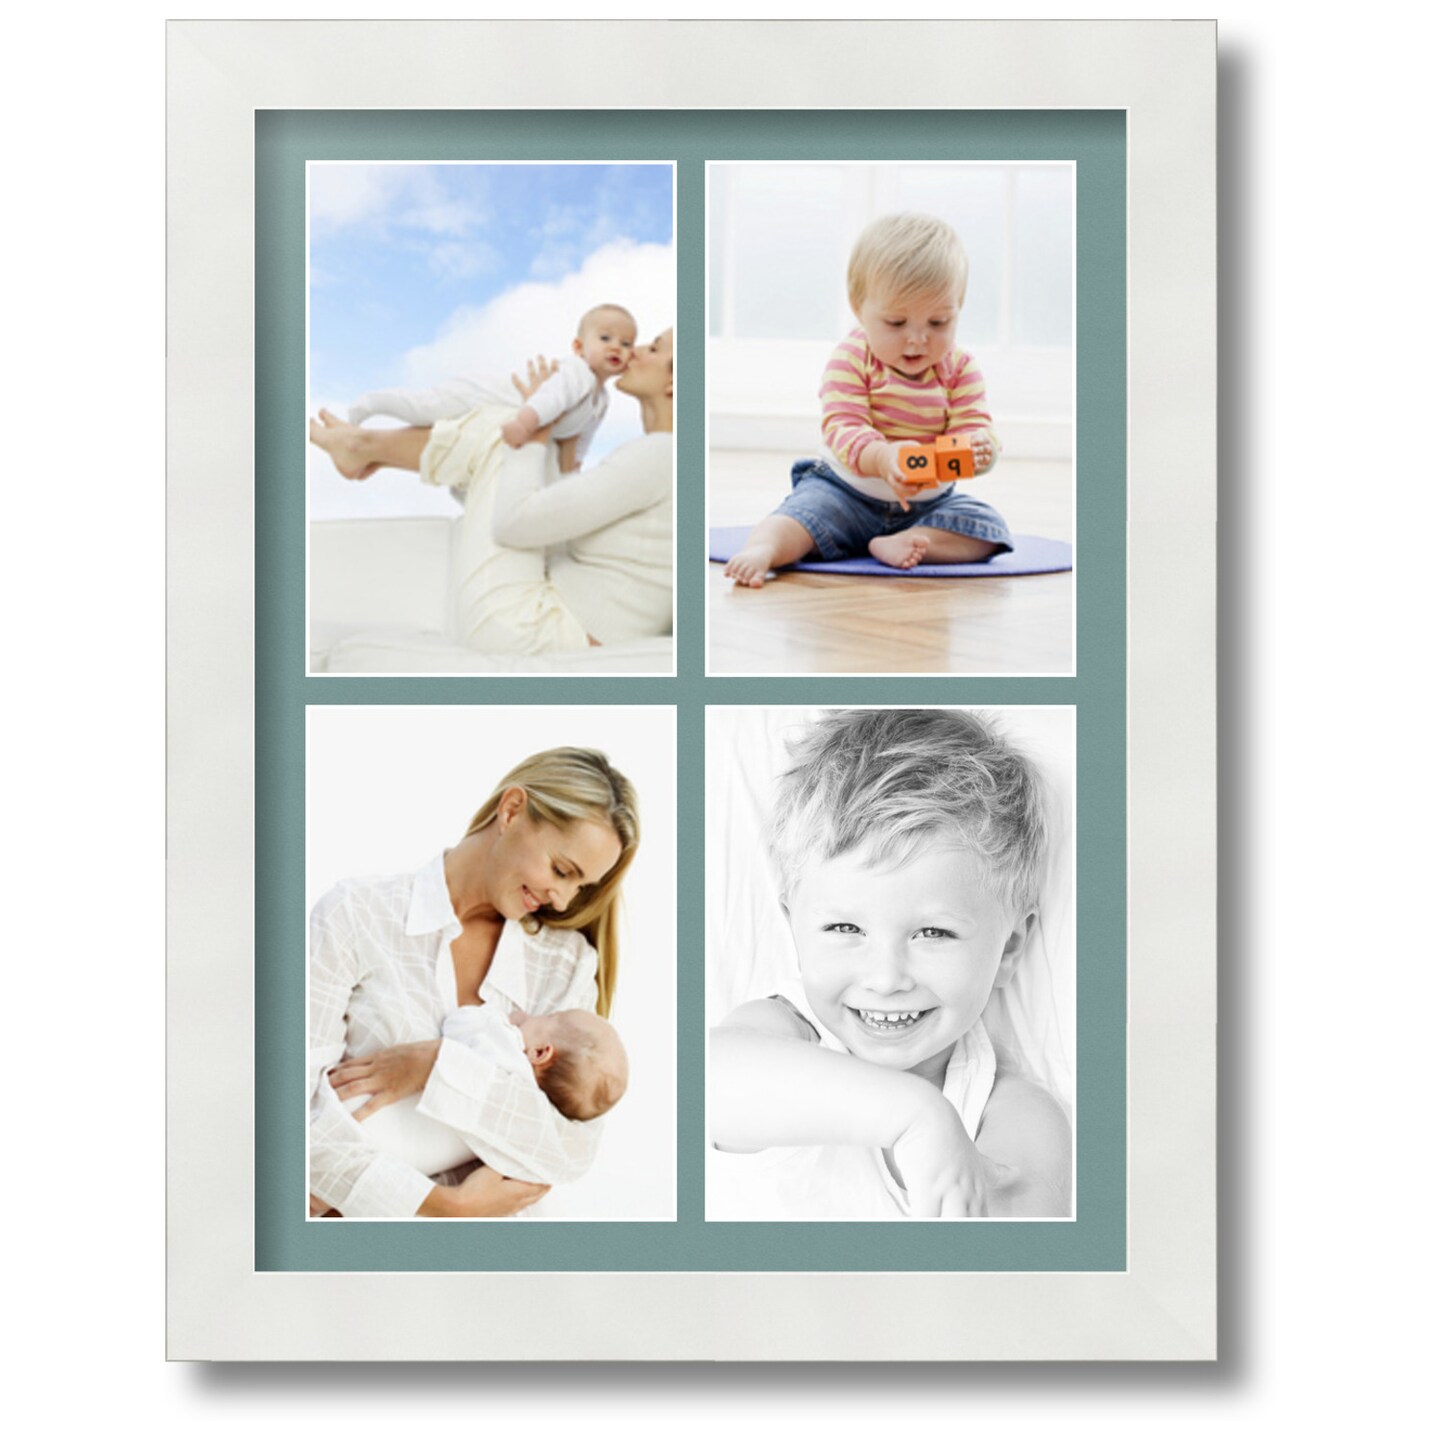 ArtToFrames Collage Photo Picture Frame with 4 - 5x7 inch Openings, Framed in White with Over 62 Mat Color Options and Regular Glass (CSM-3966-2153)